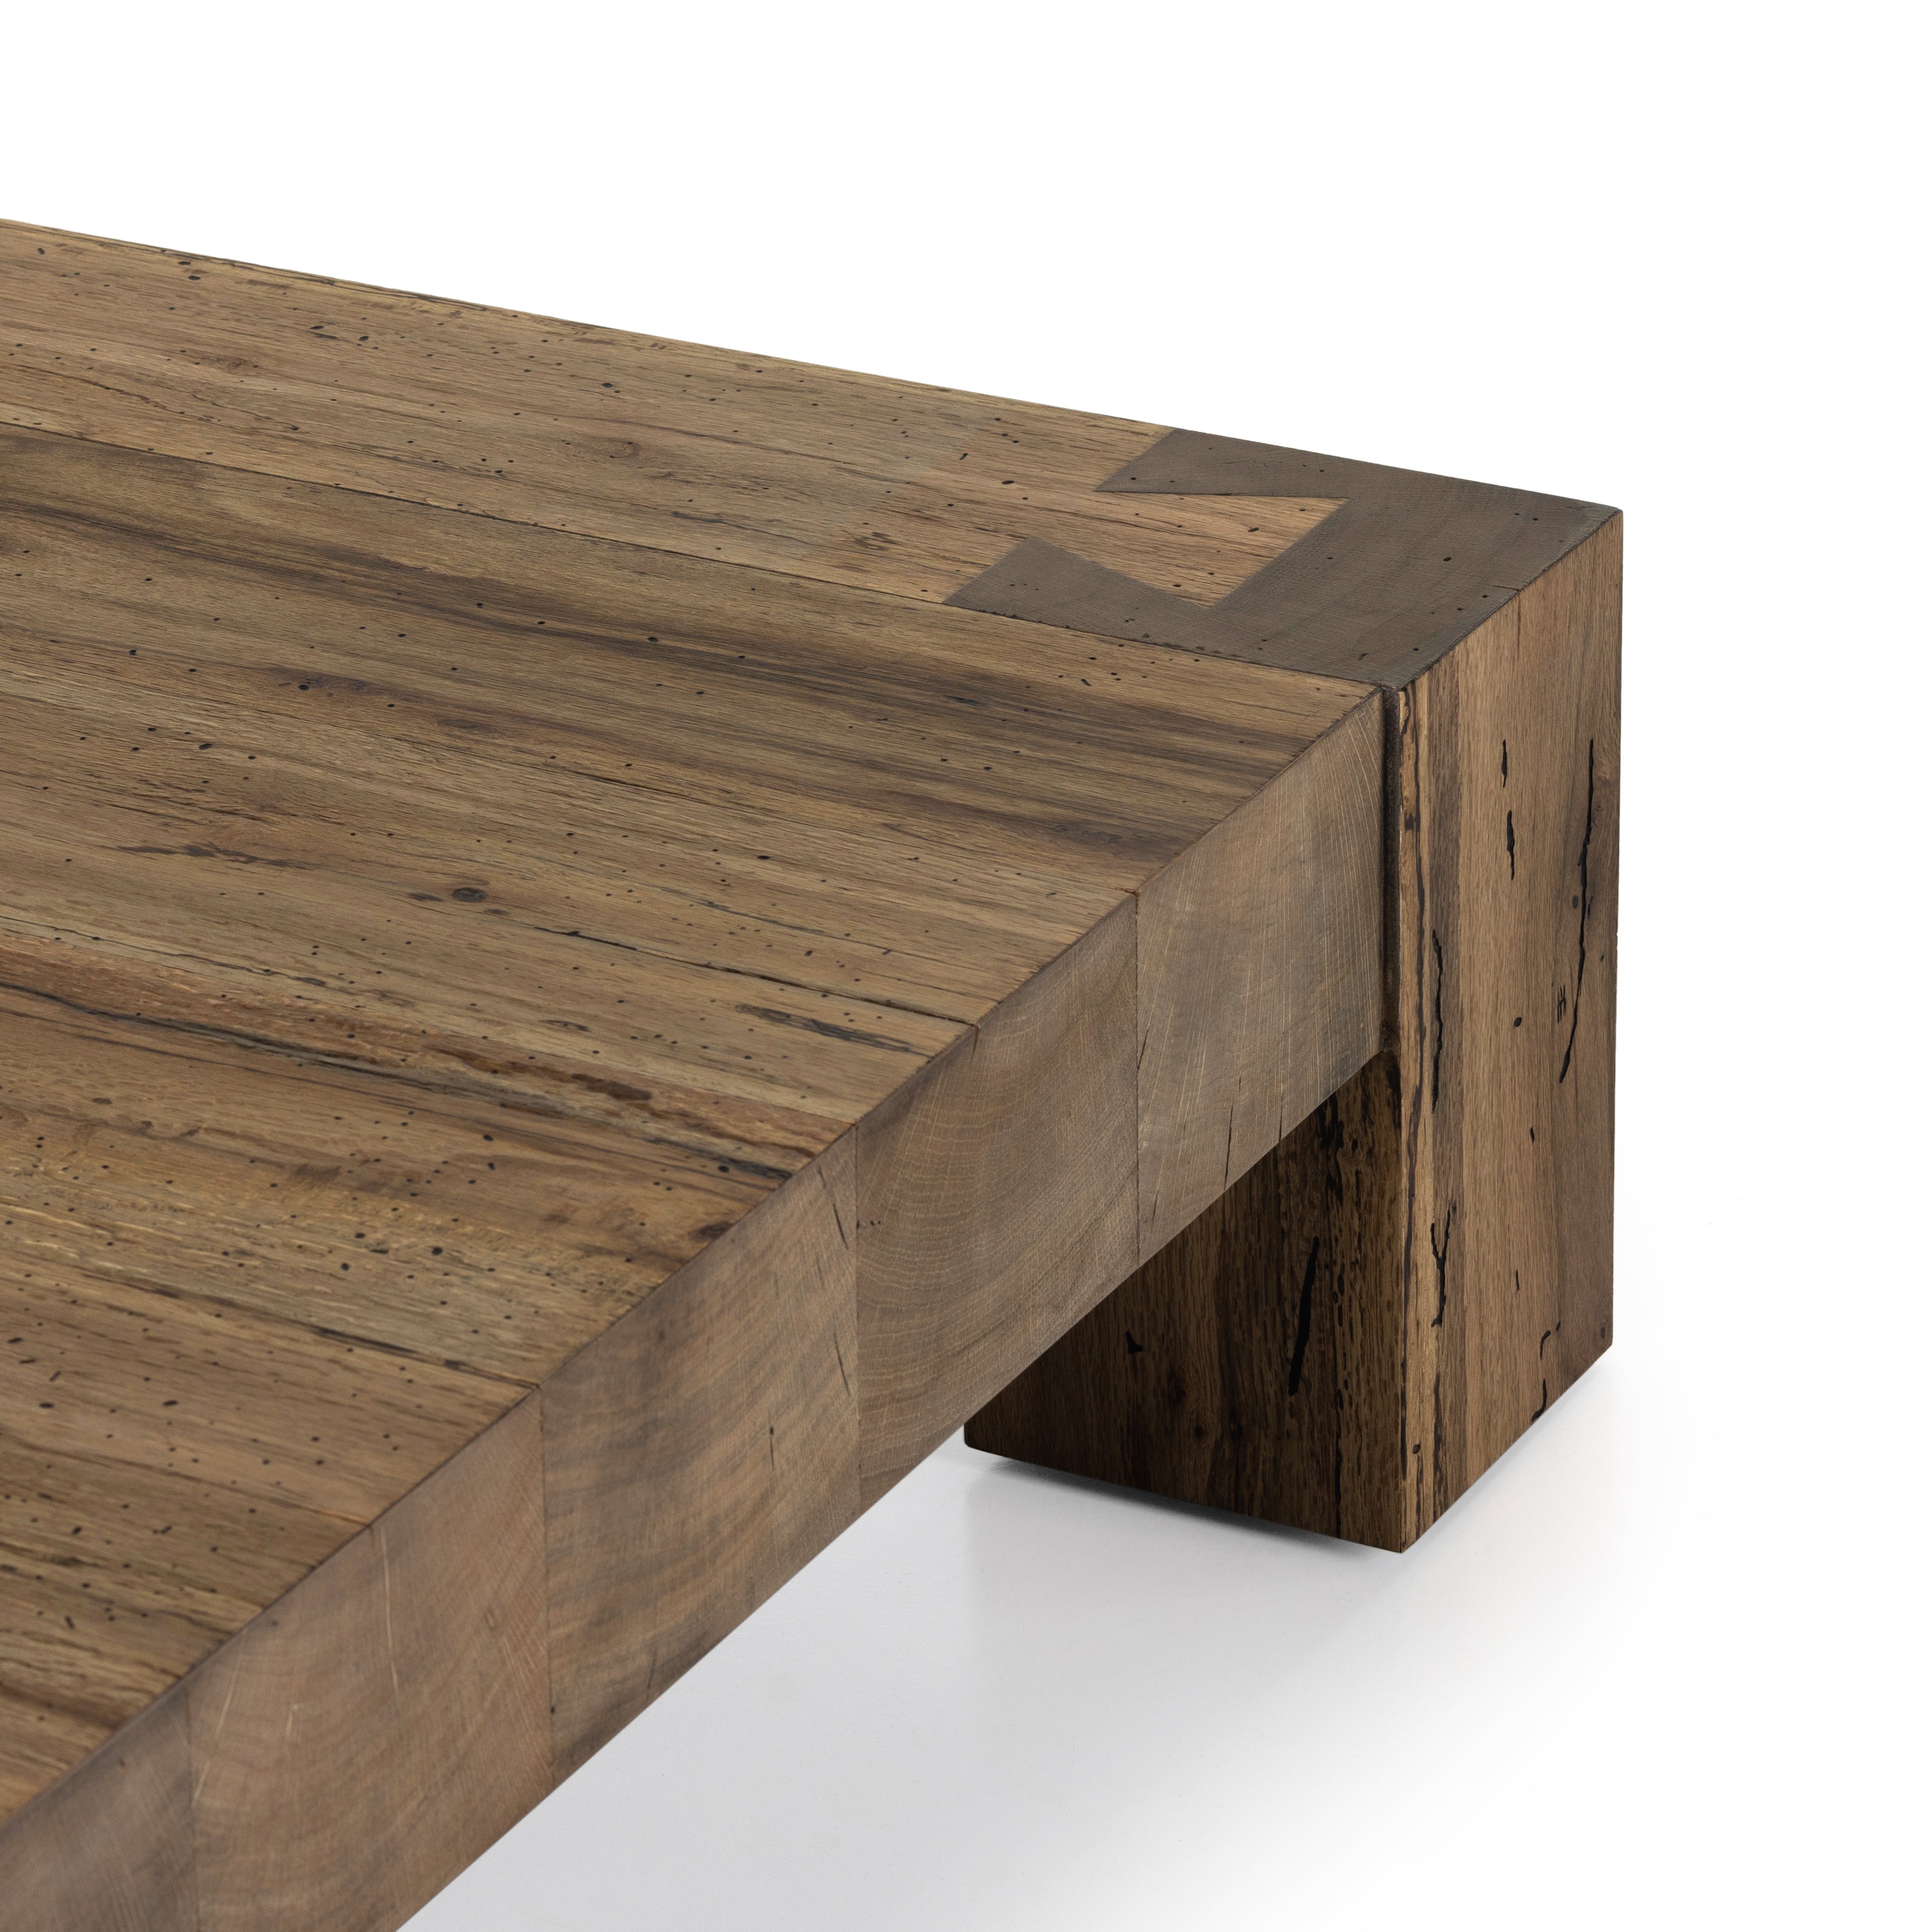 Made from thick-cut oak veneer with a faux rustic finish made to emulate wormwood, the Abaso Rustic Wormwood Oak Coffee Table is a low, large-scale coffee table that features chunky squared legs and dovetail joinery detailing. Amethyst Home provides interior design services, furniture, rugs, and lighting in Seattle metro area.